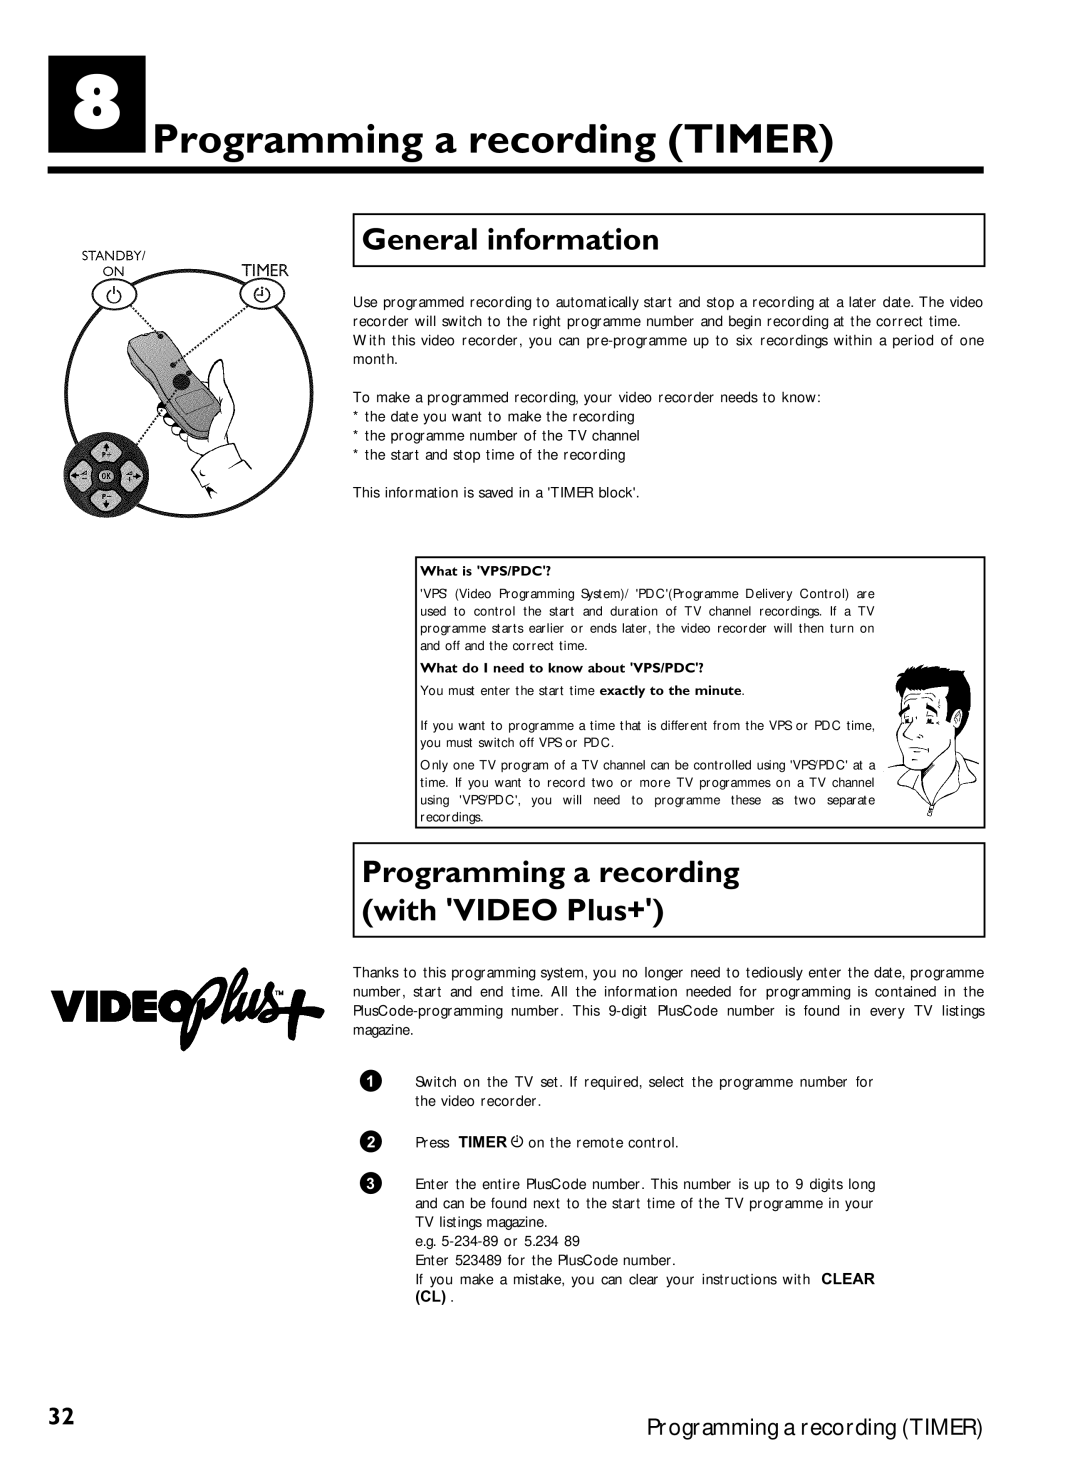 Philips VCR VR 170/07 manual Programming a recording Timer, Programming a recording with Video Plus+, What is VPS/PDC? 